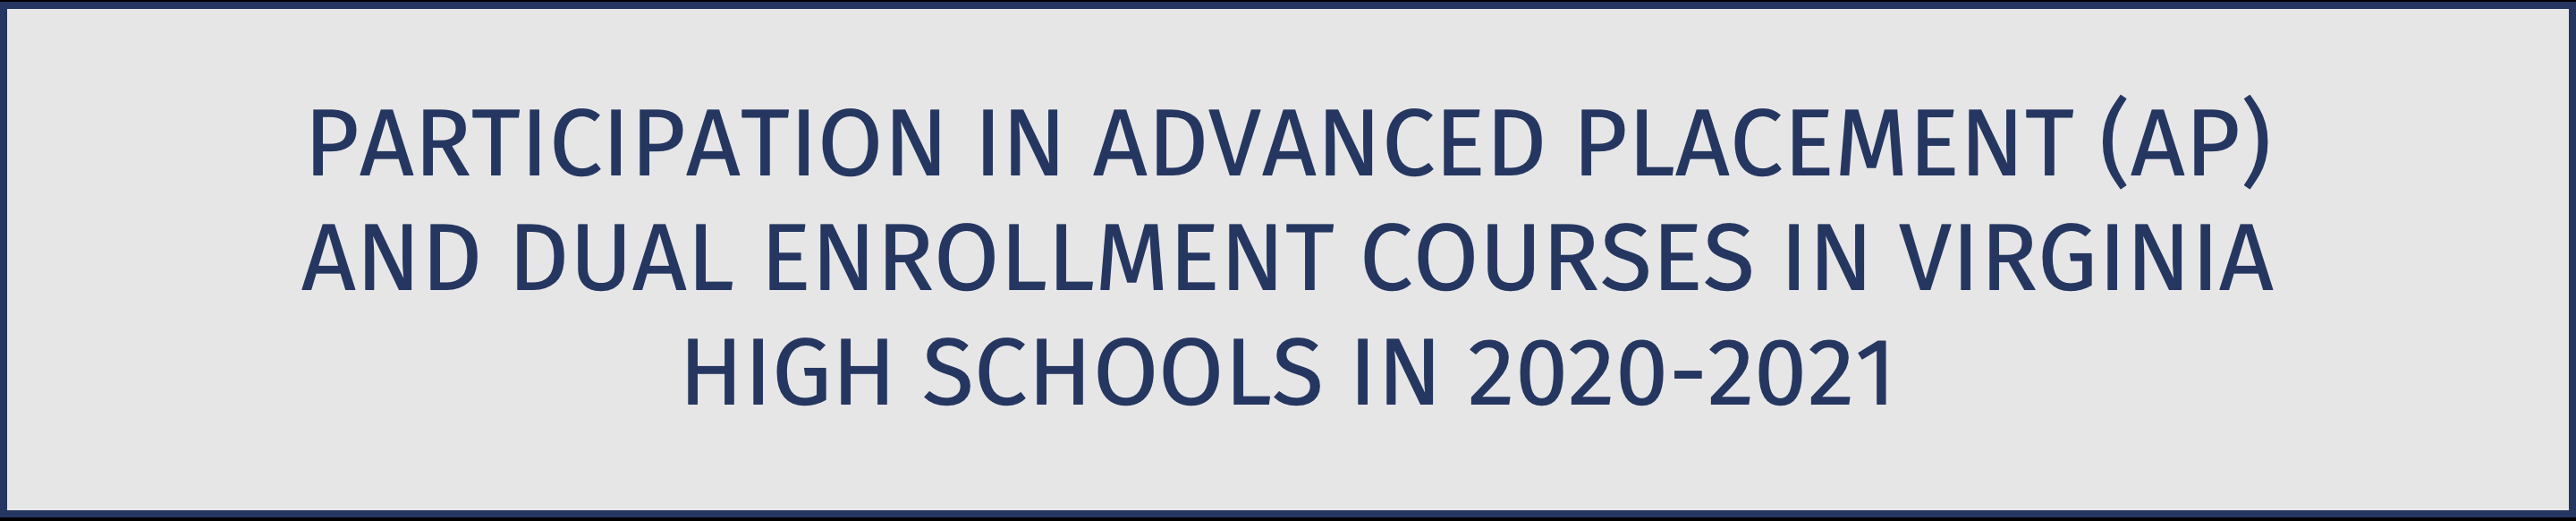 Blue banner for dashboard depicting AP and Dual Enrollment participation in Virginia high schools 2020-2021